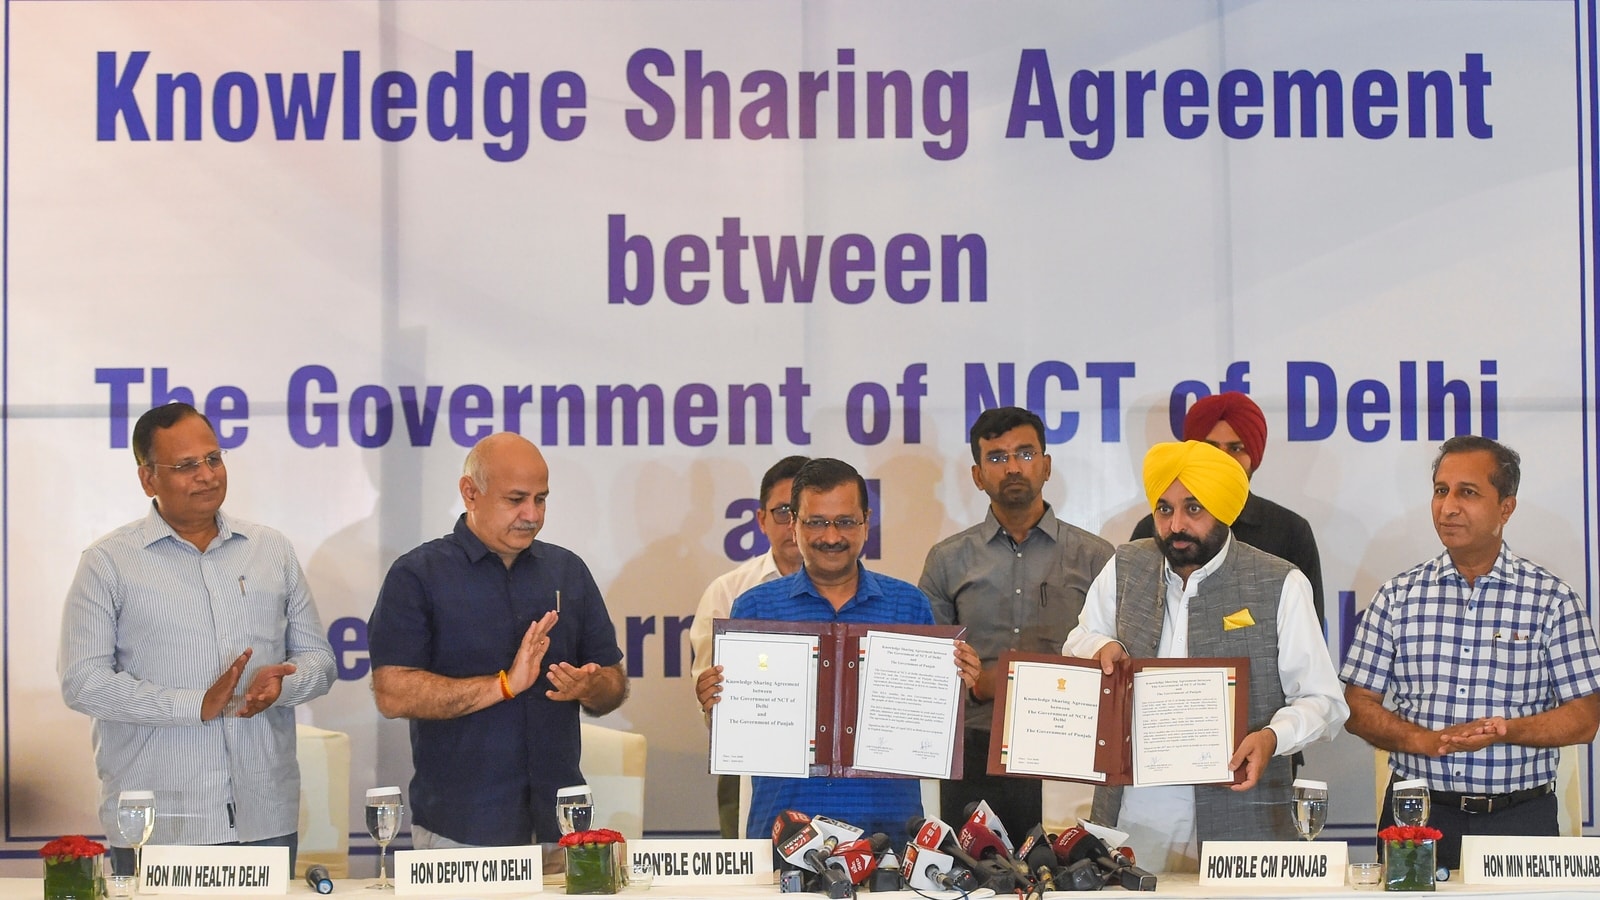 Knowledge Sharing Agreement signed between Delhi and Punjab